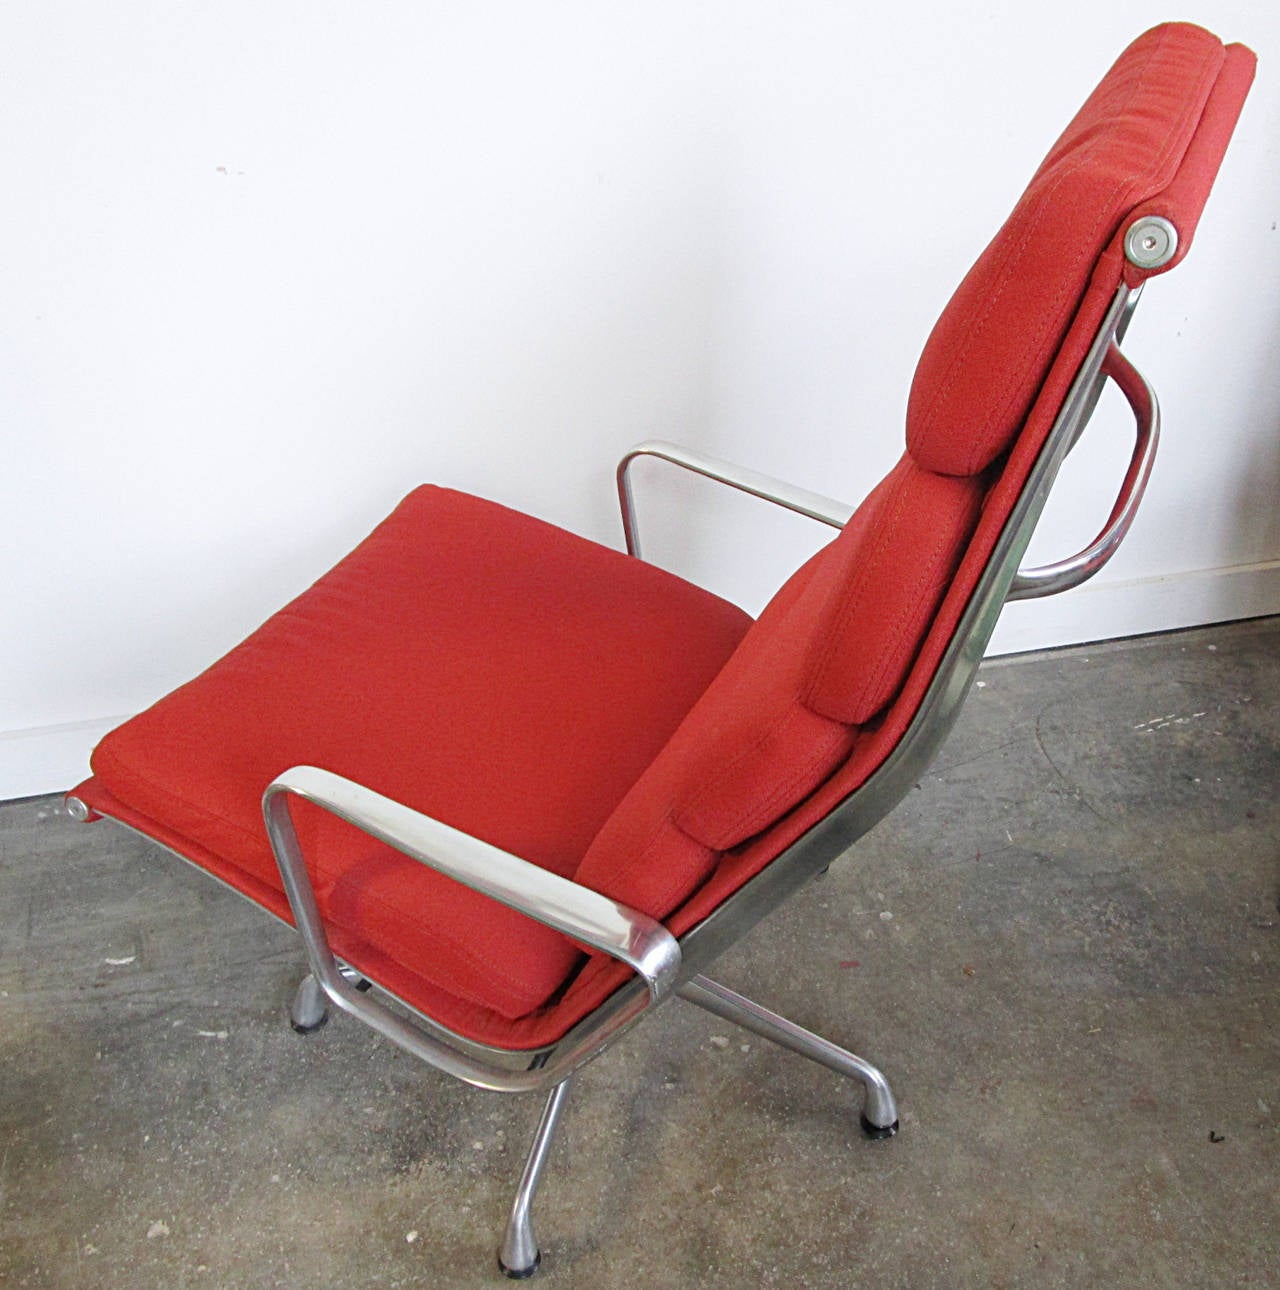 Classic Eames executive soft pad tilt swivel lounge chair for Herman Miller. Originally design in 1958 as part of the aluminum group. This chair hails from the late 1980s. High back four pad design in a ripe tomato fabric.